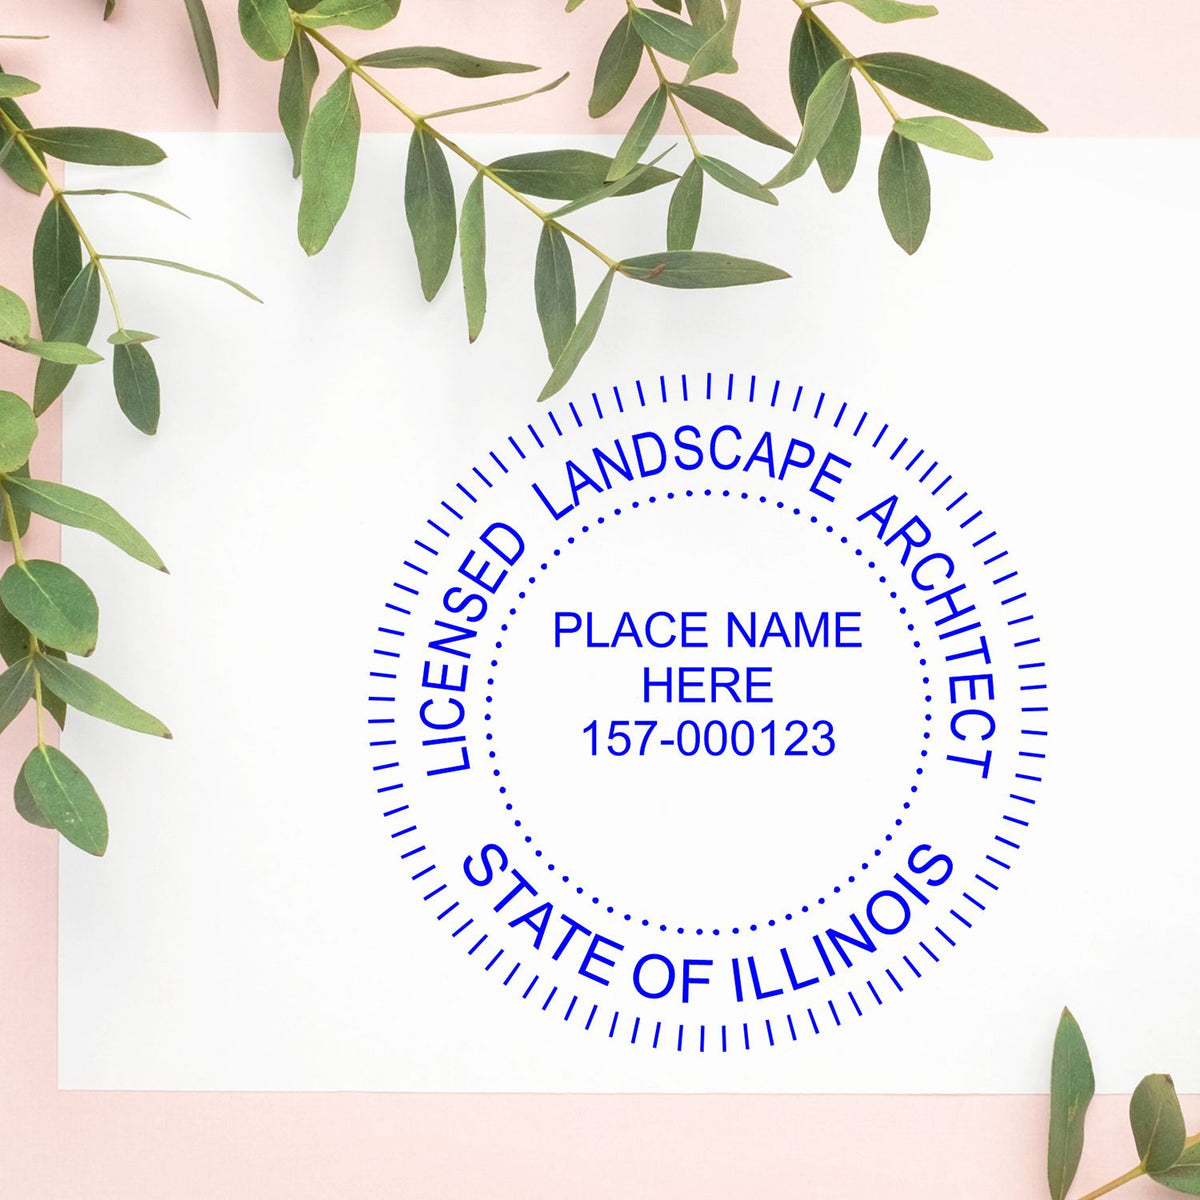 The Digital Illinois Landscape Architect Stamp stamp impression comes to life with a crisp, detailed photo on paper - showcasing true professional quality.